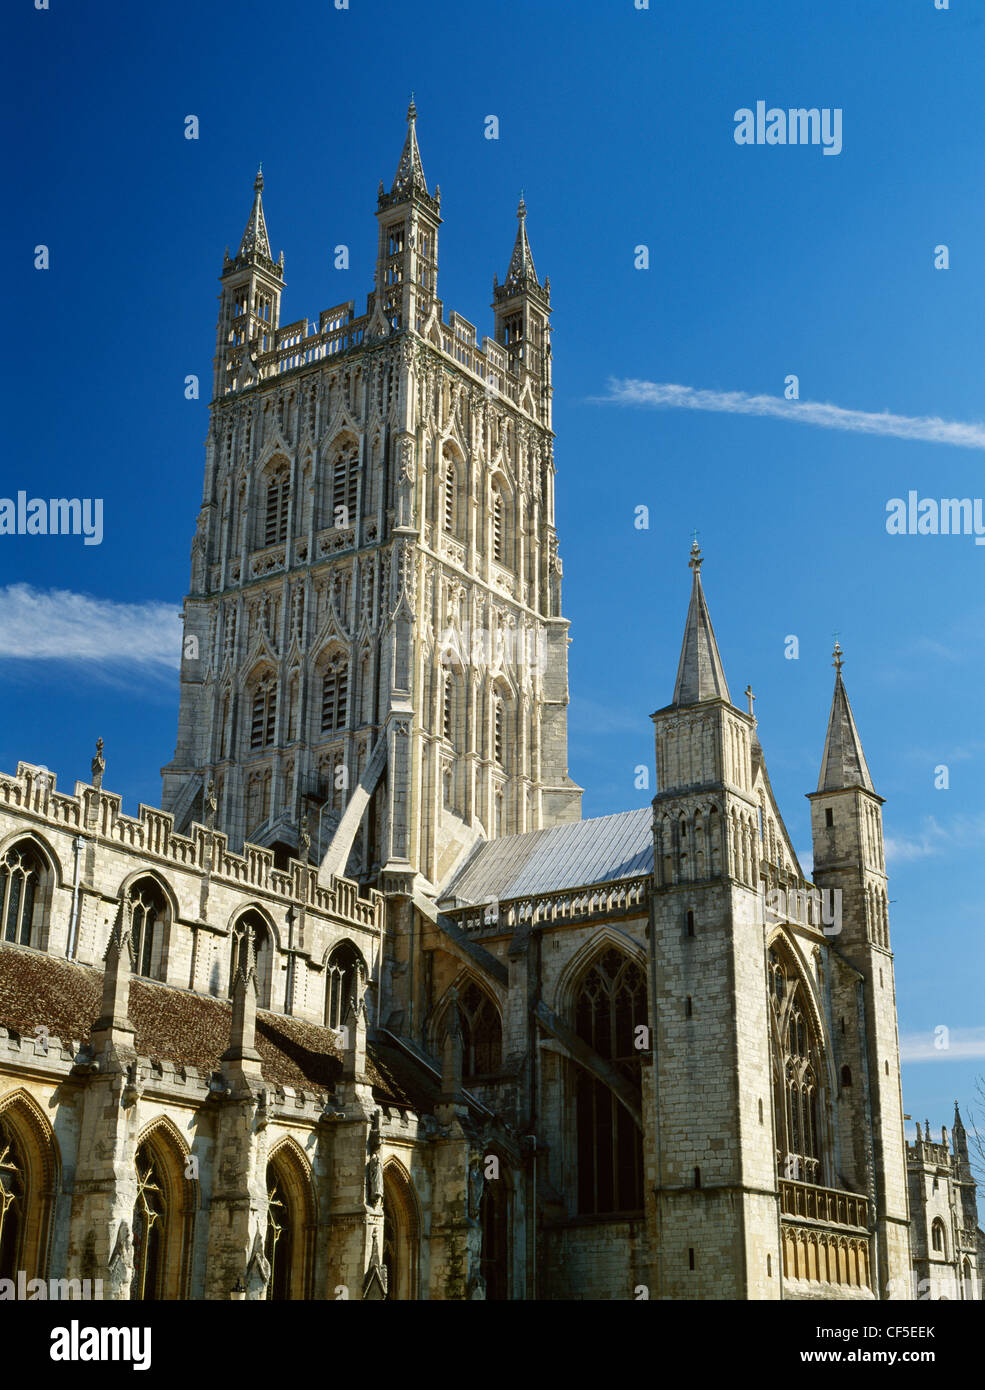 The Perpendicular central tower and Norman south transept turrets of Gloucester cathedral, the former Benedictine abbey church o Stock Photo